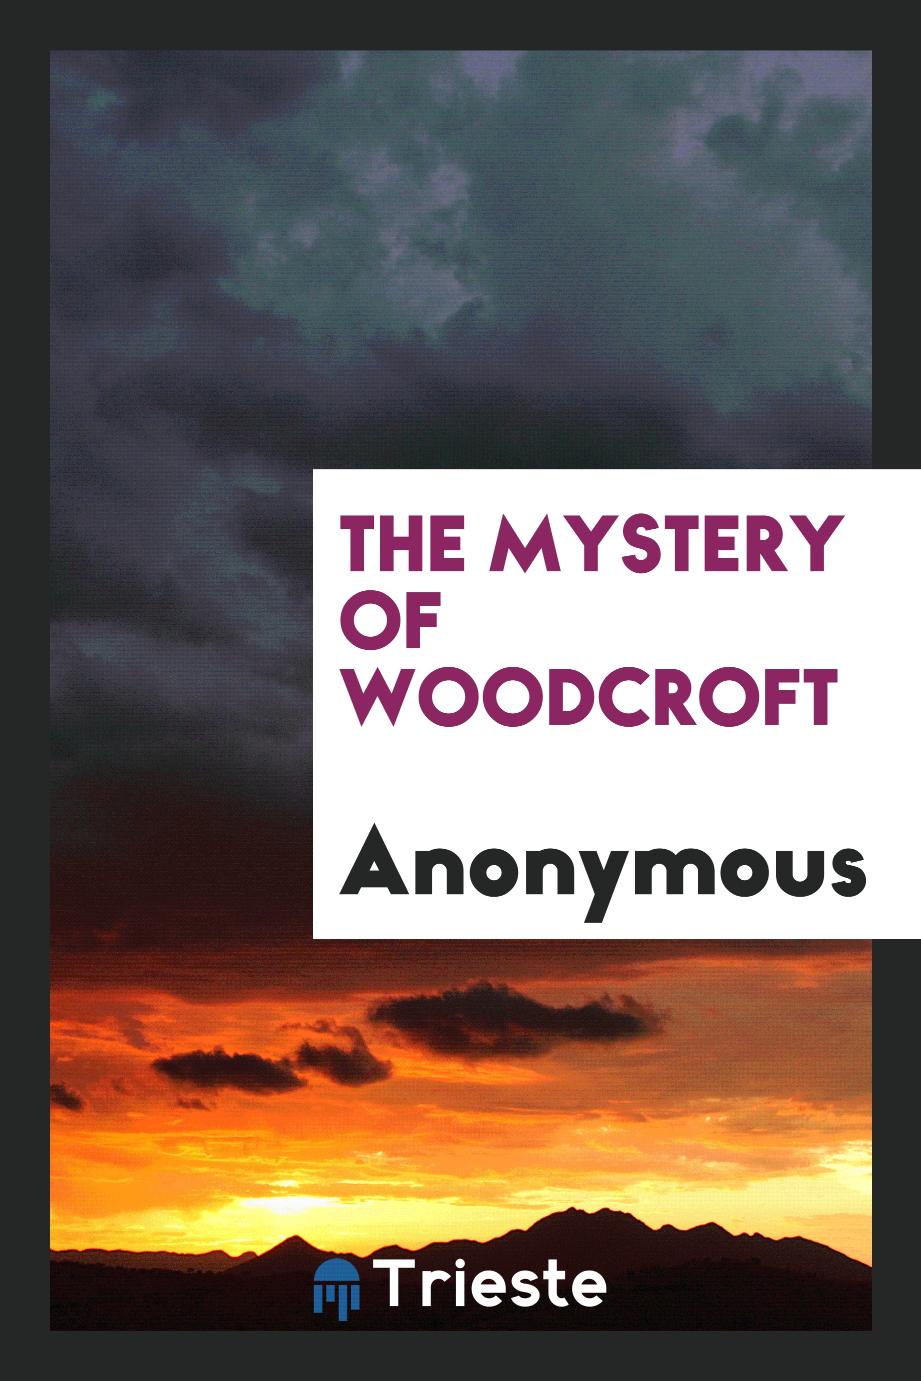 The Mystery of Woodcroft